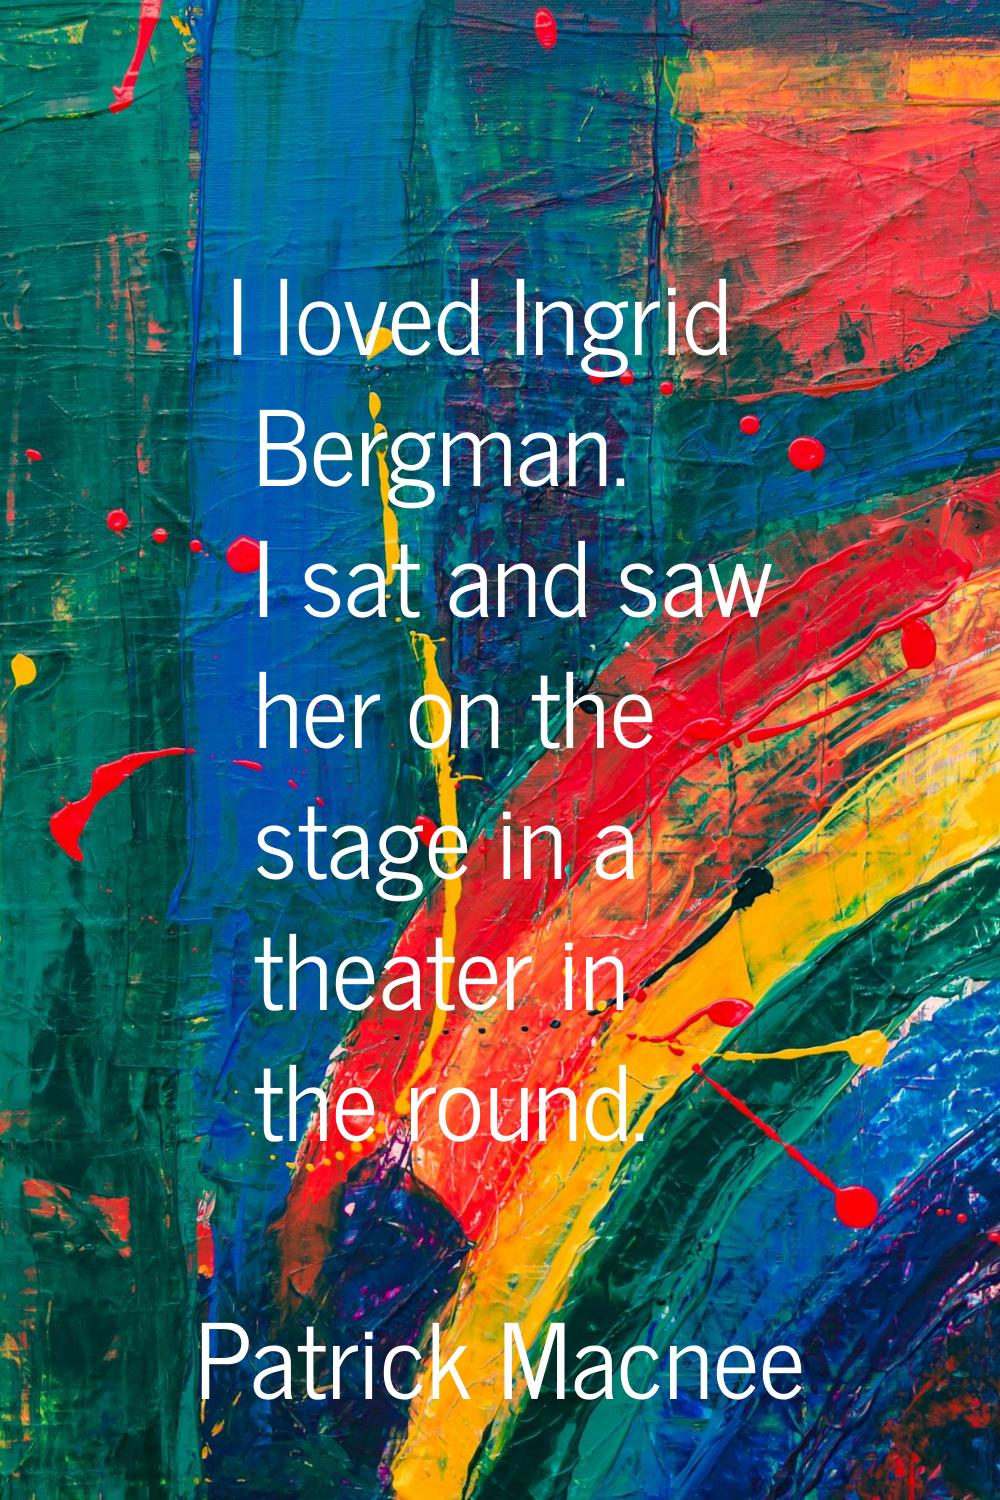 I loved Ingrid Bergman. I sat and saw her on the stage in a theater in the round.